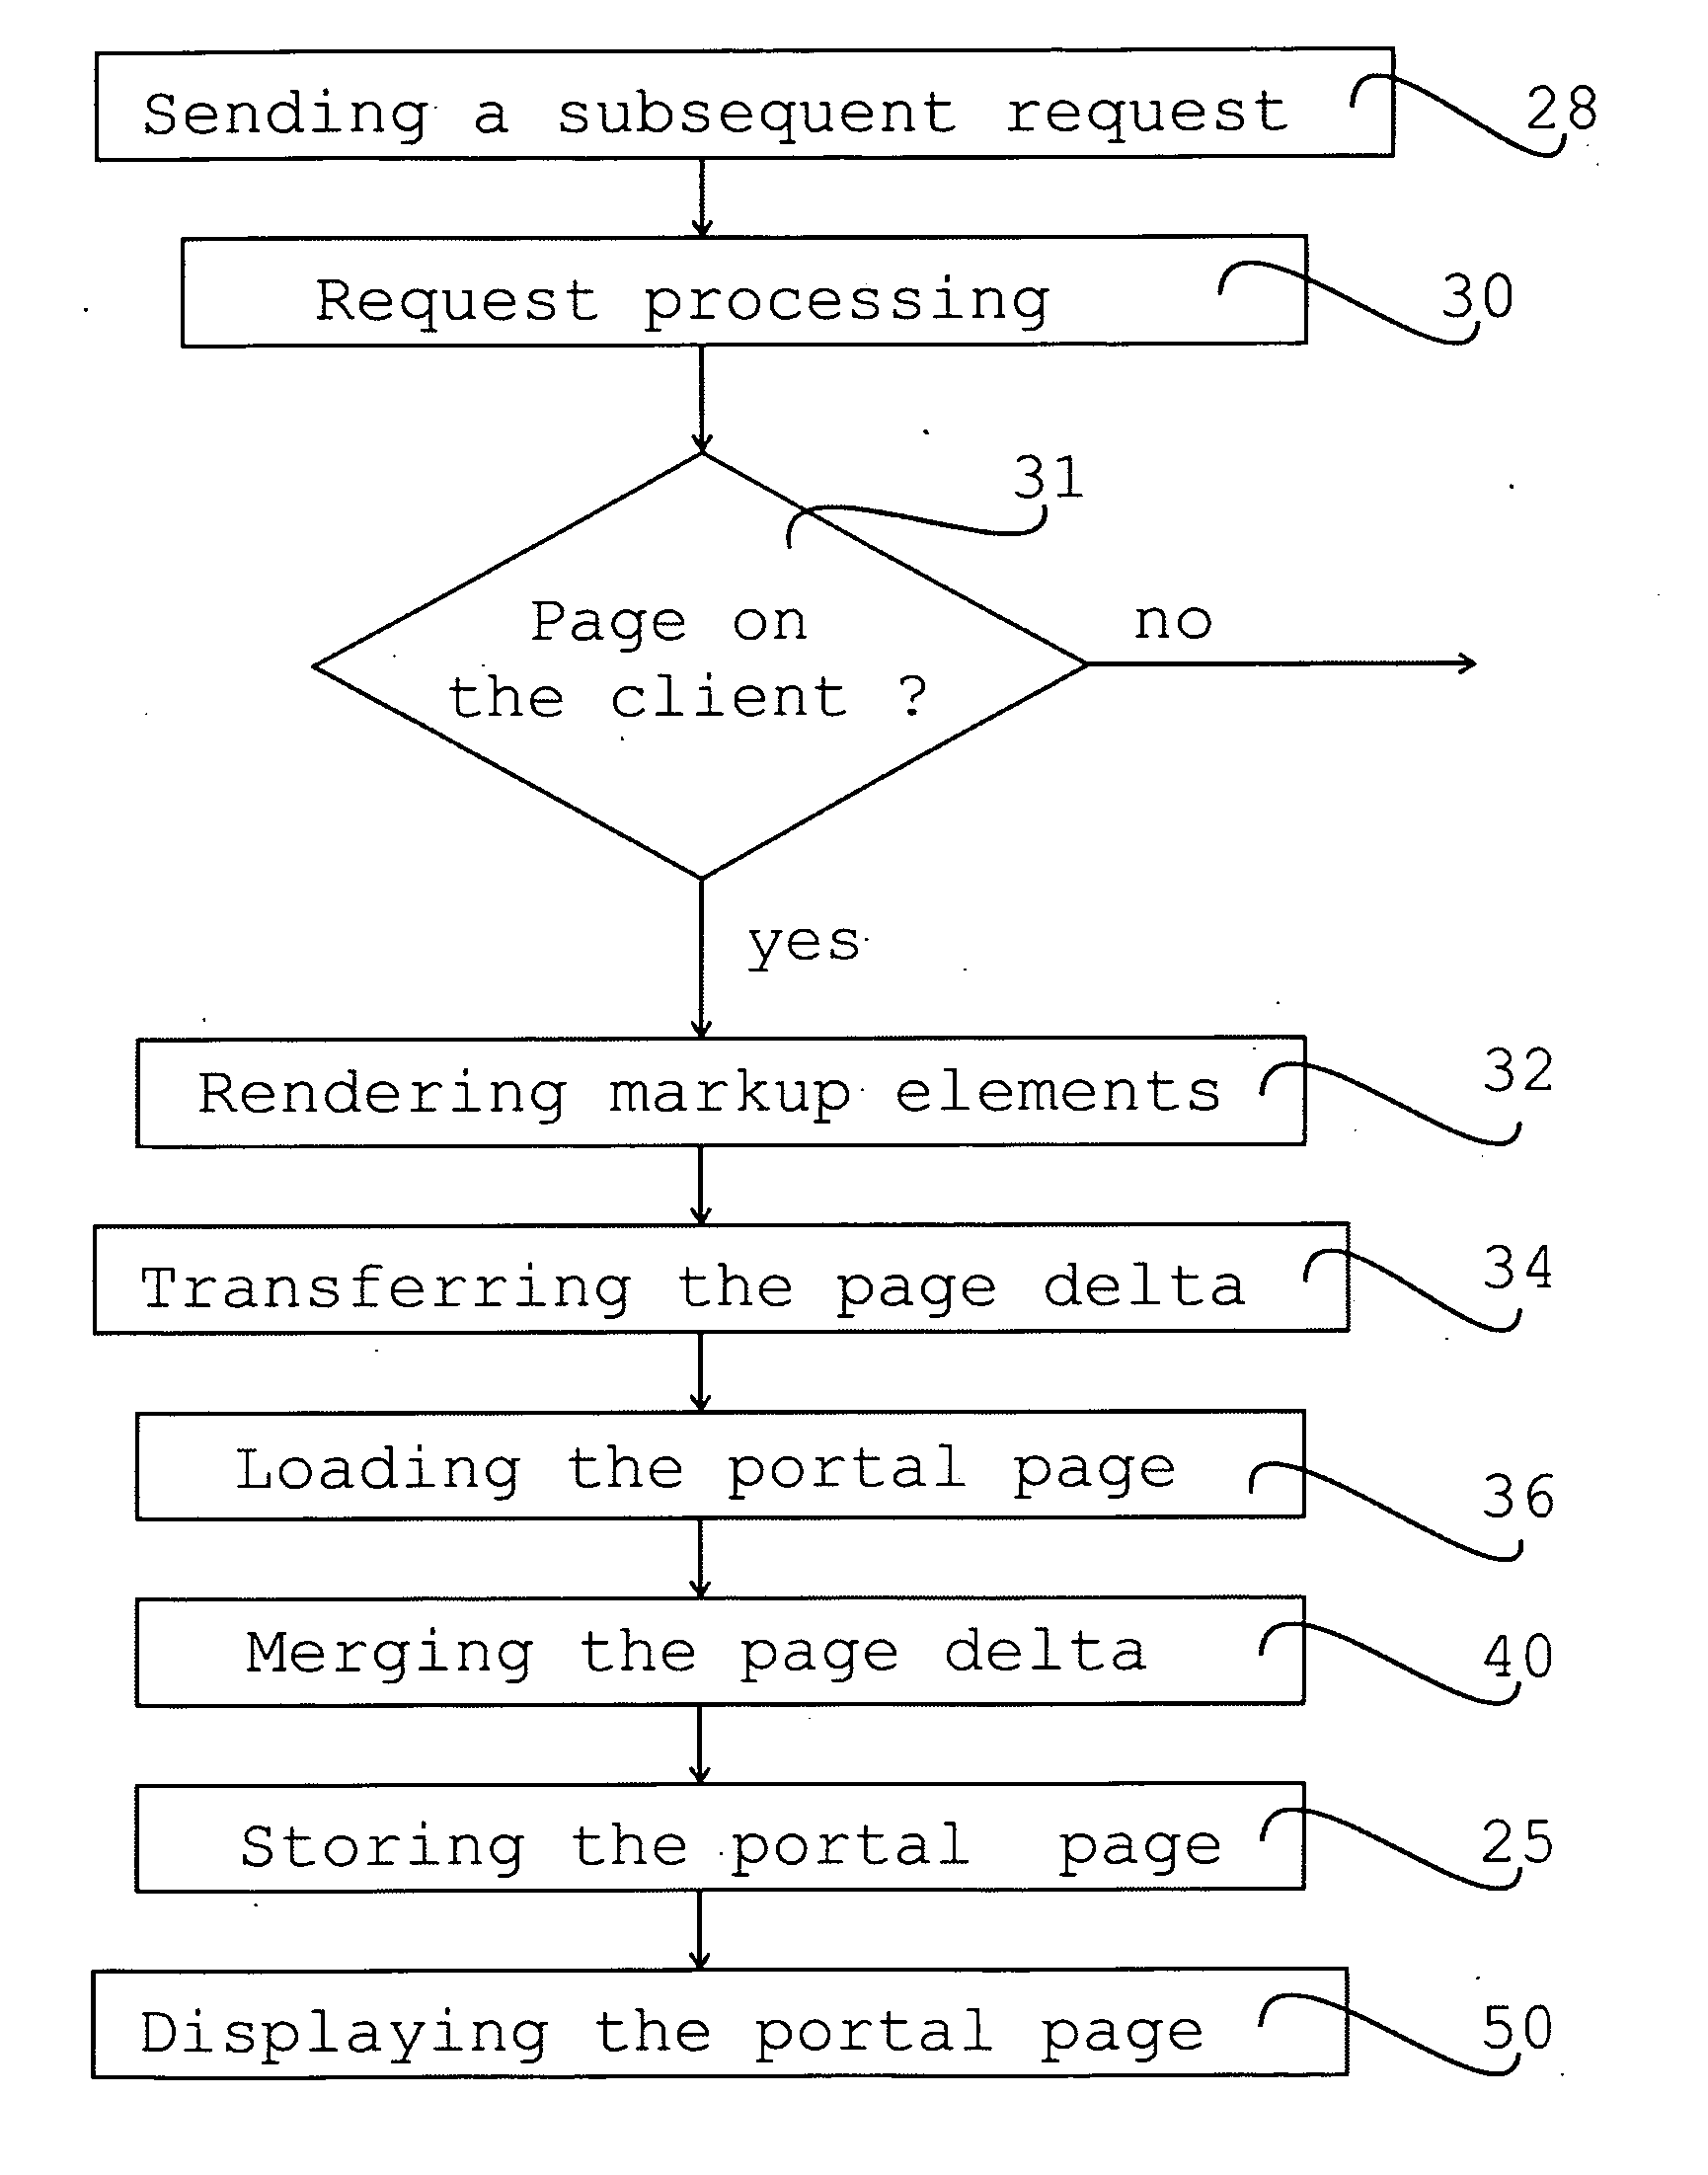 Method for rendering and refreshing a portal page